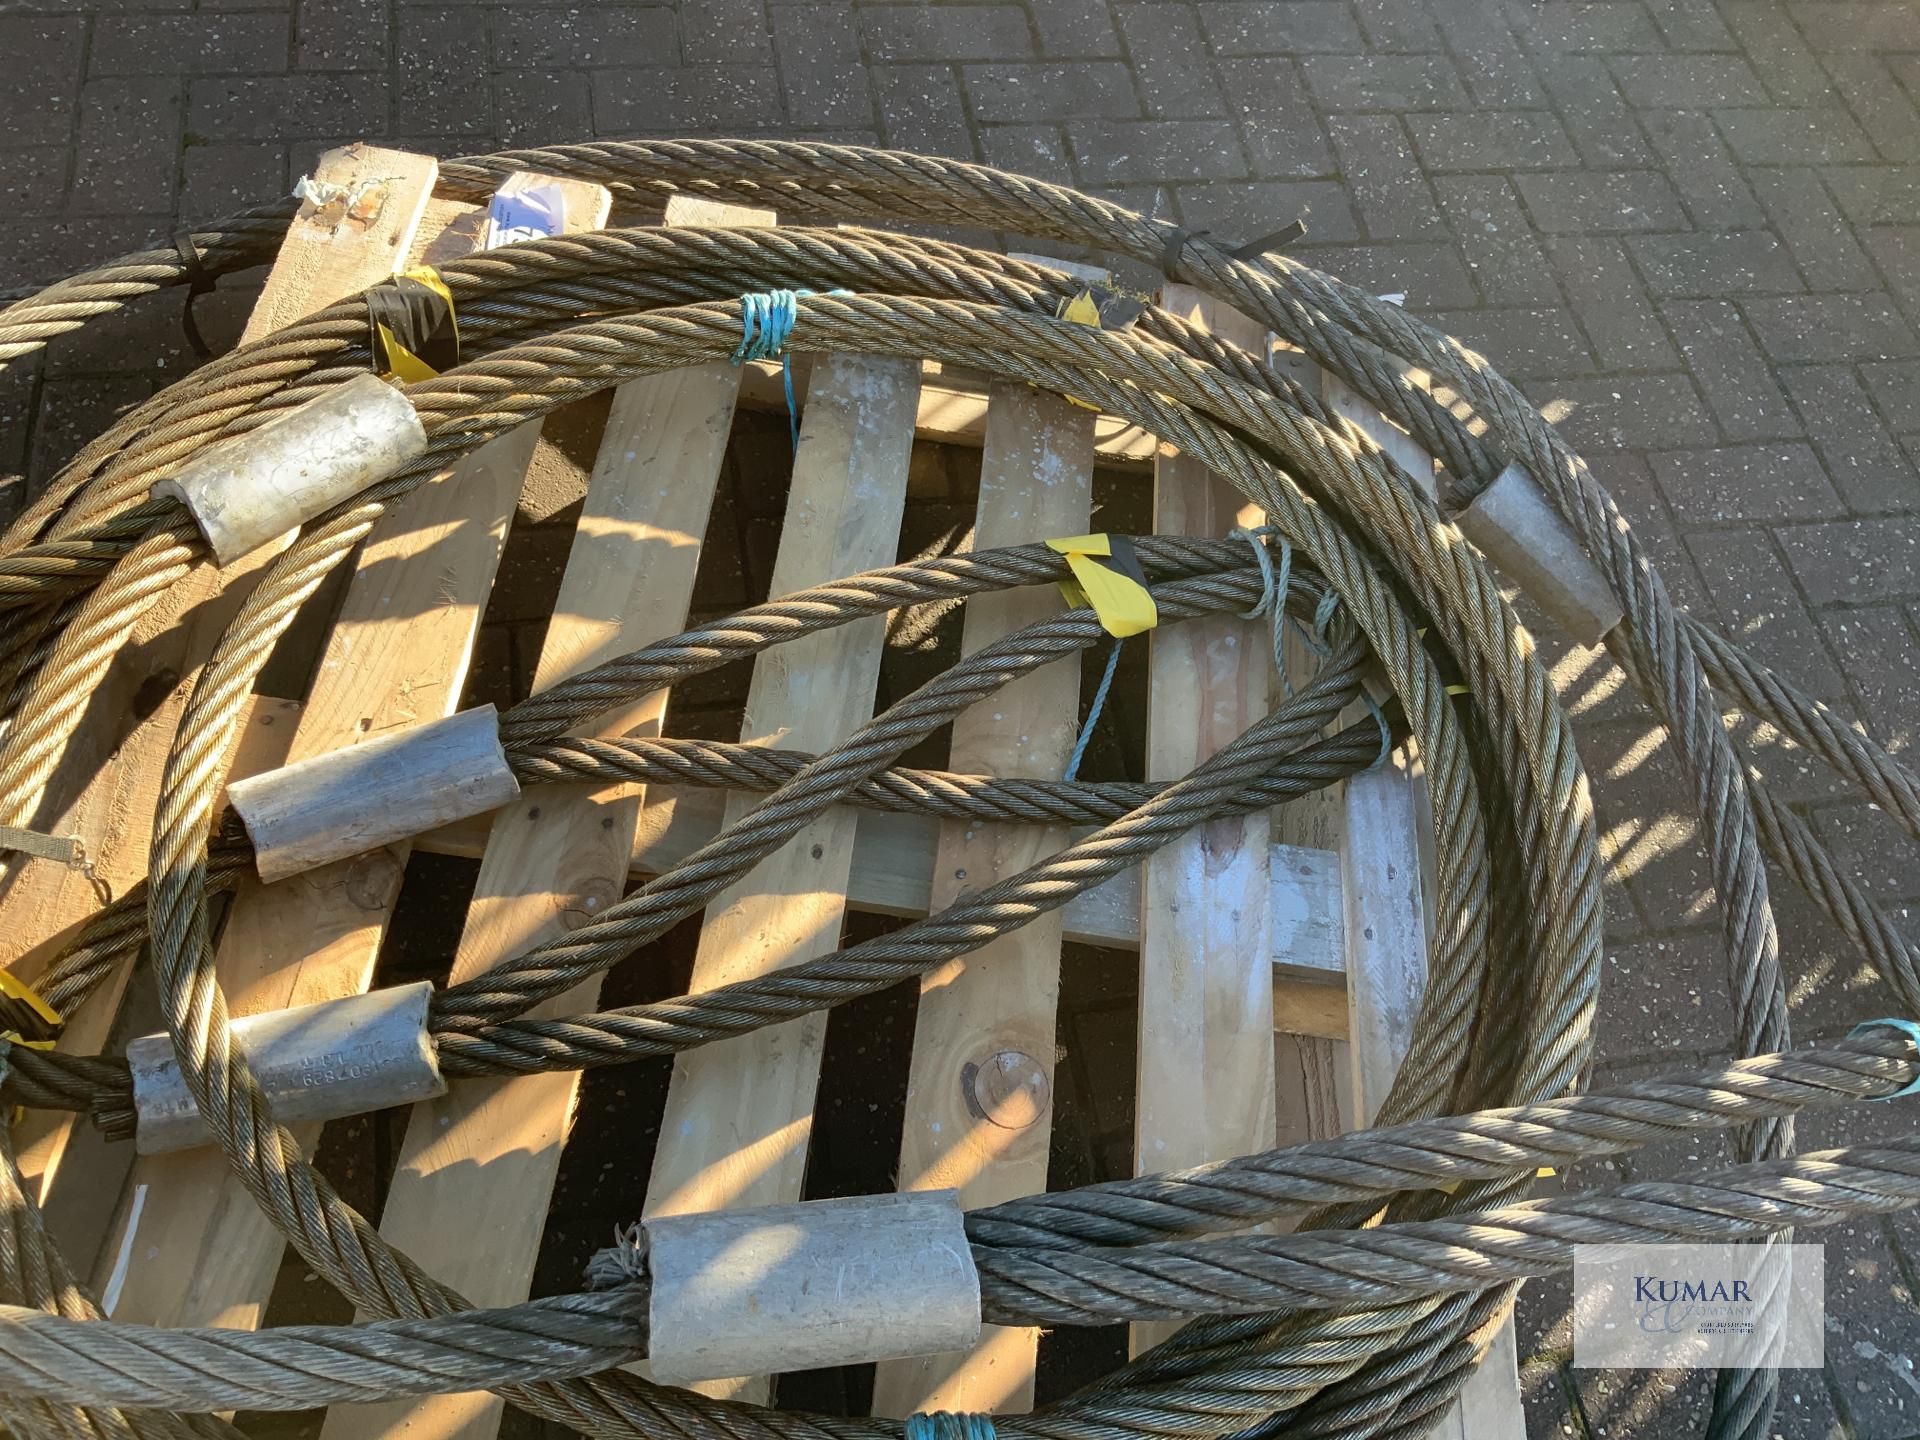 Pallet of Braided Steel Wire Lifting Cables - Mixed SWL Ratings - Image 13 of 14